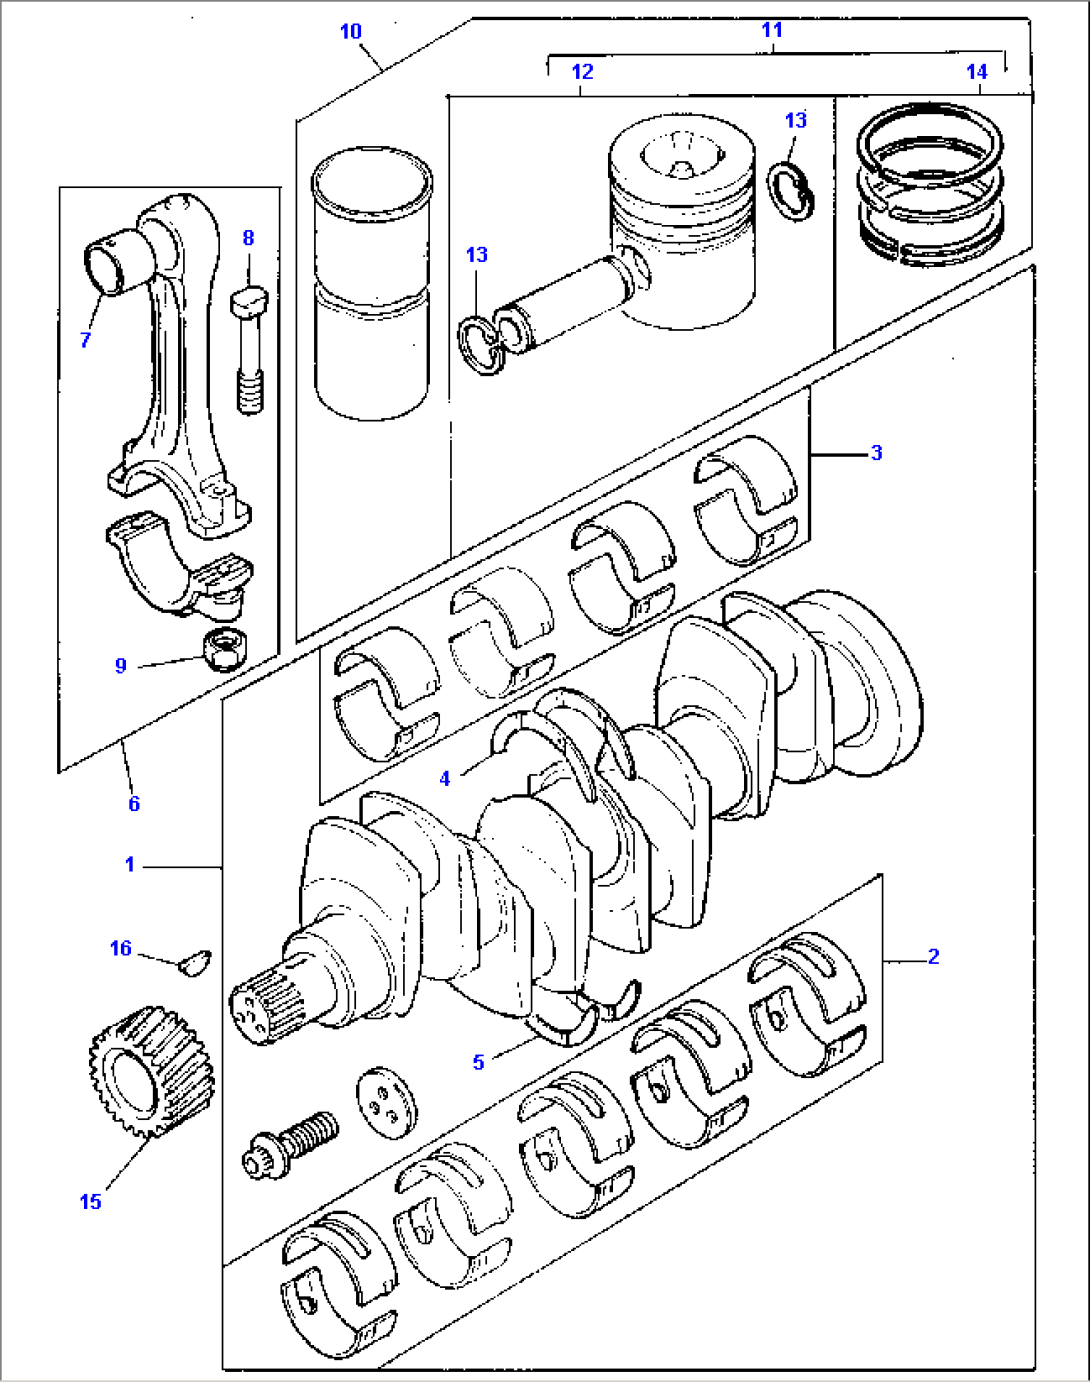 CRANKSHAFT - PISTONS AND CONNECTING RODS